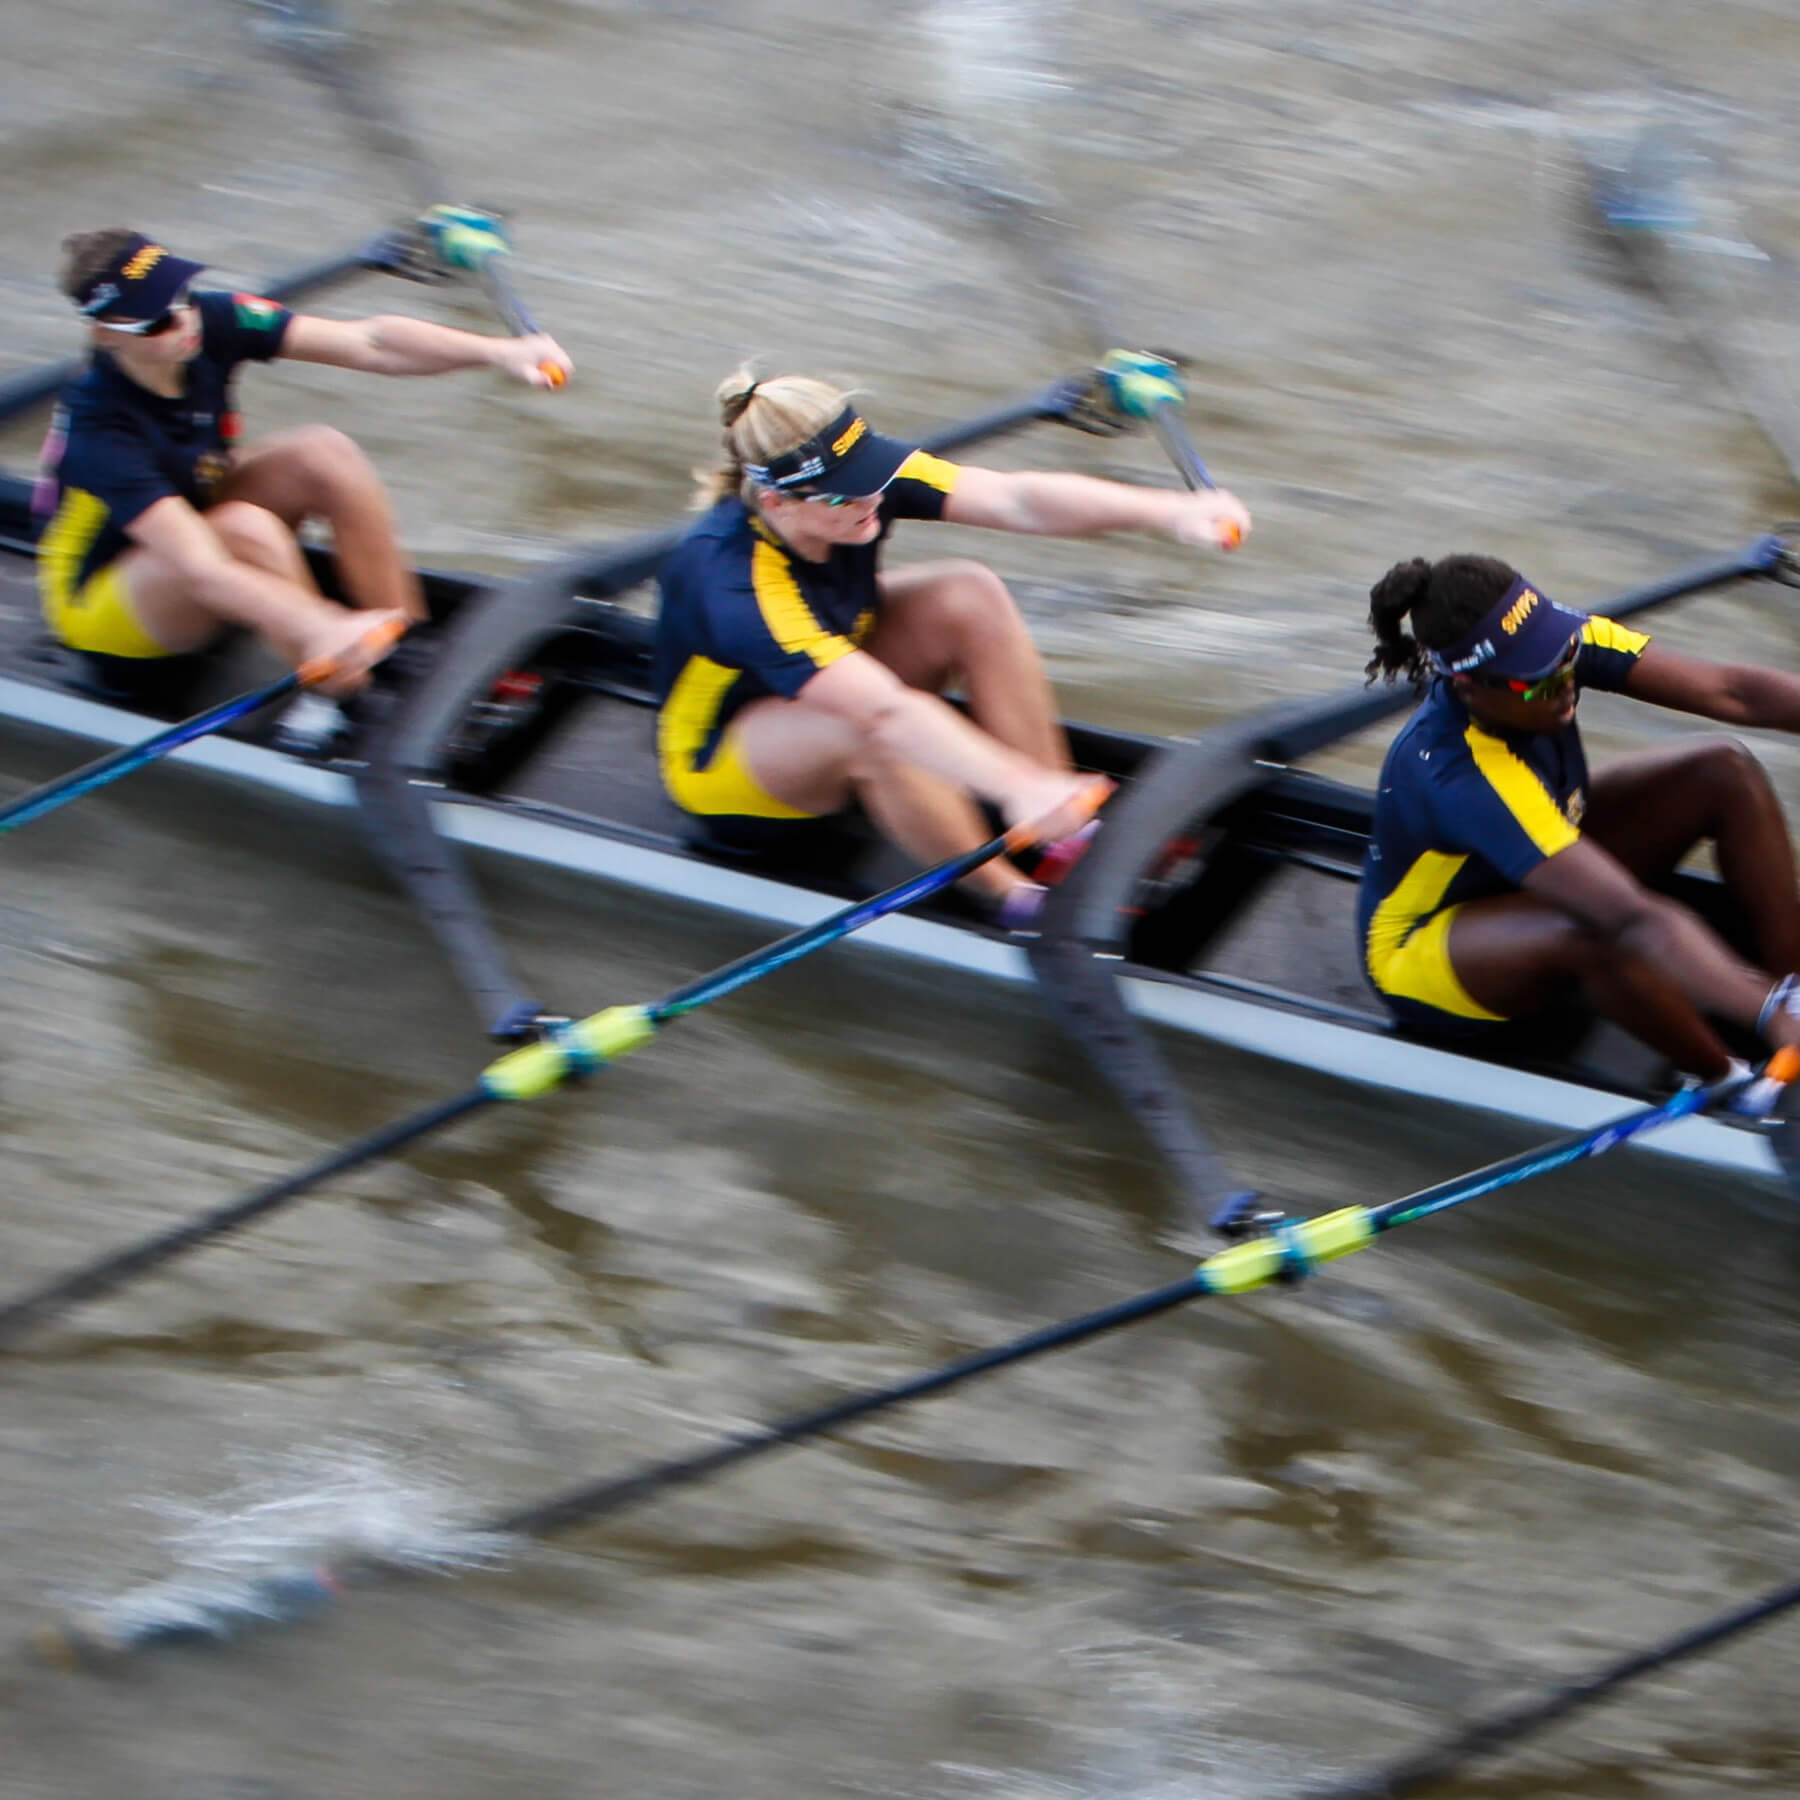 Rowers wearing customisable rowing kit from Crewroom Clothing.